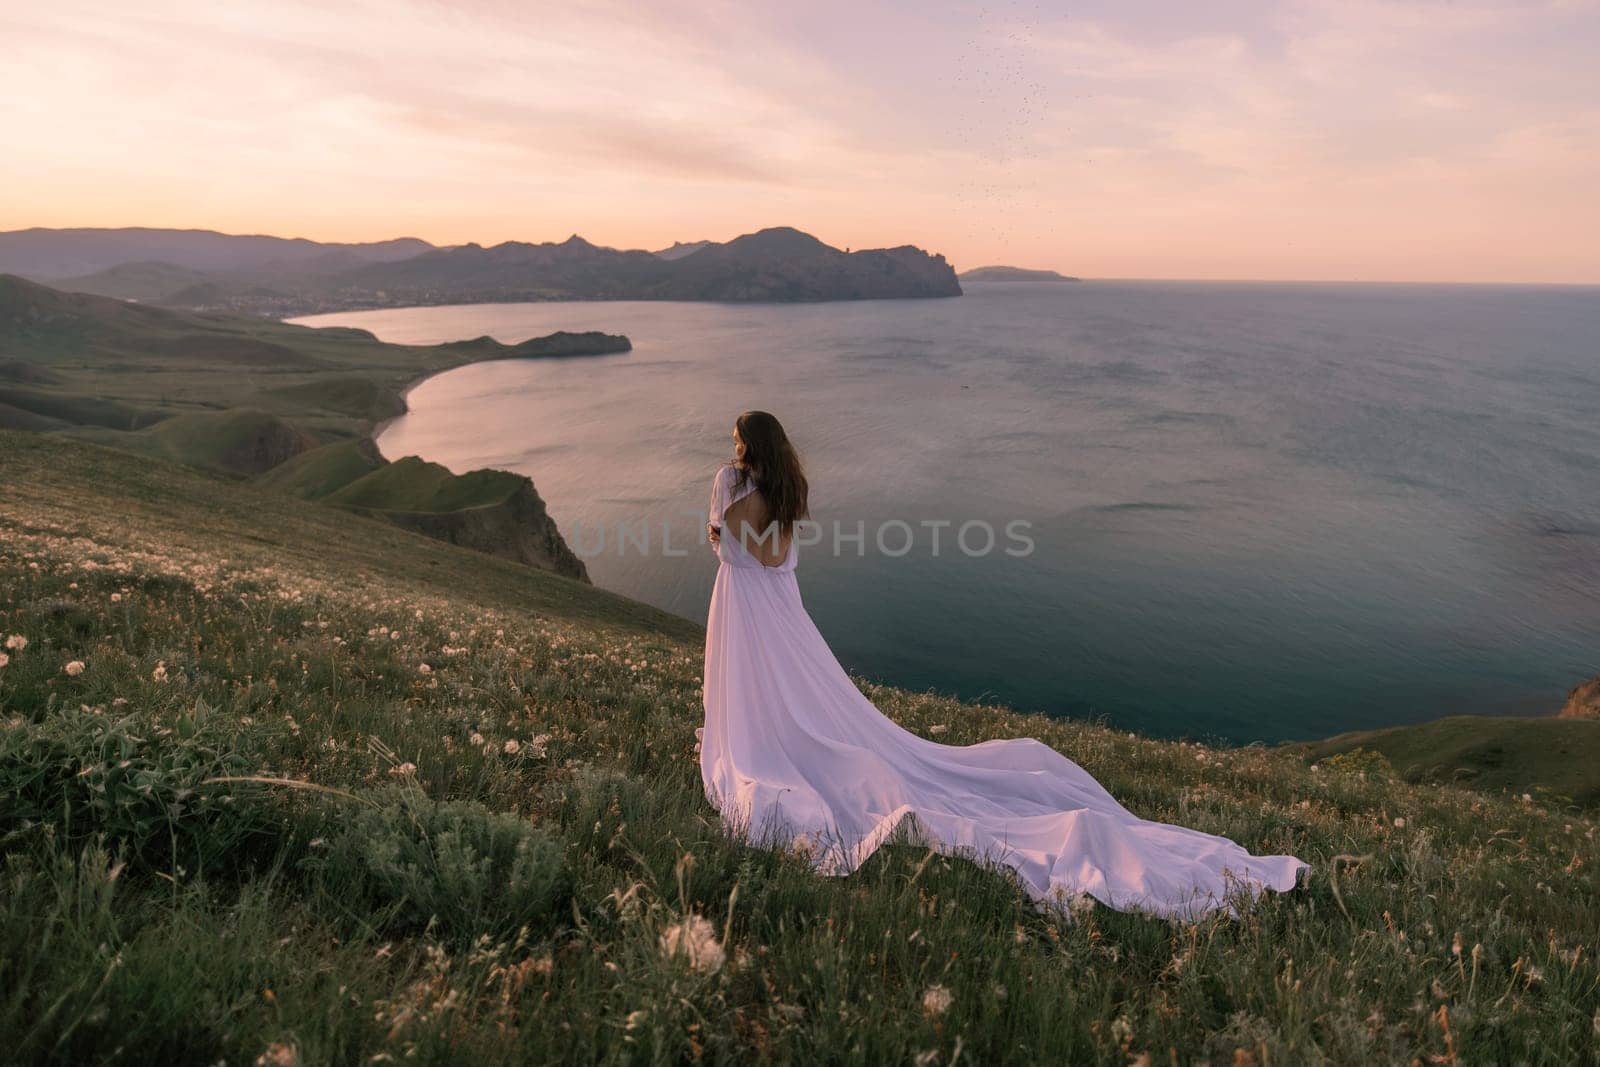 A woman in a white dress stands on a hill overlooking the ocean by Matiunina